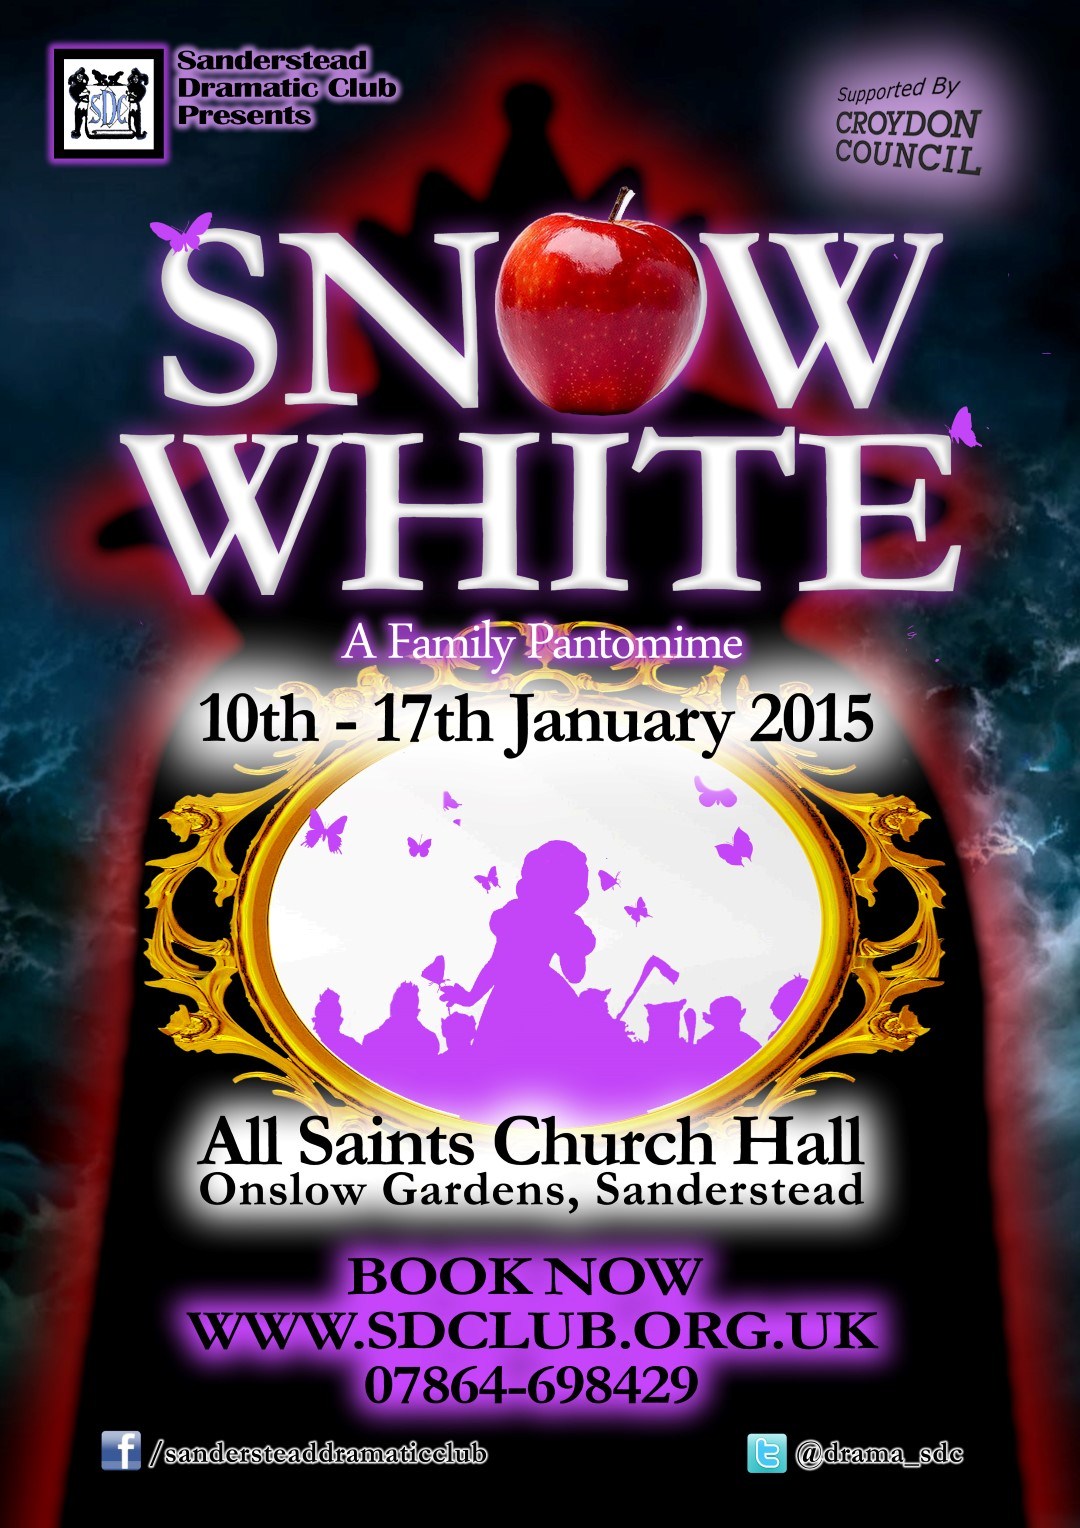 Sanderstead Dramatic Club presents Snow White and the Seven Dwarfes Pantomime